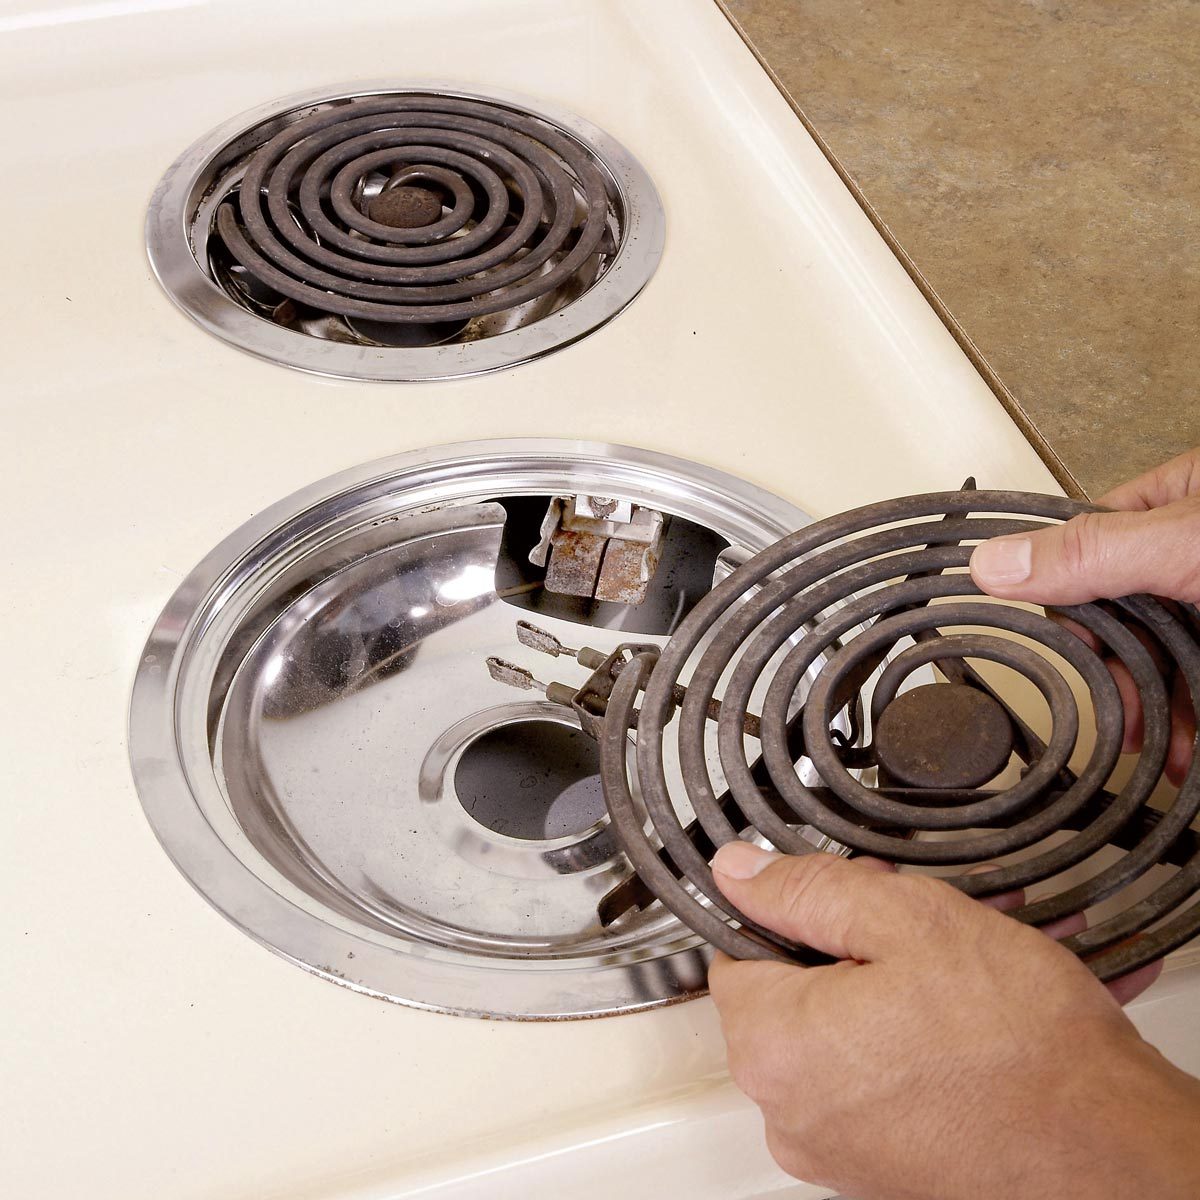 how-to-fix-electric-stove-burner-kitchenlack